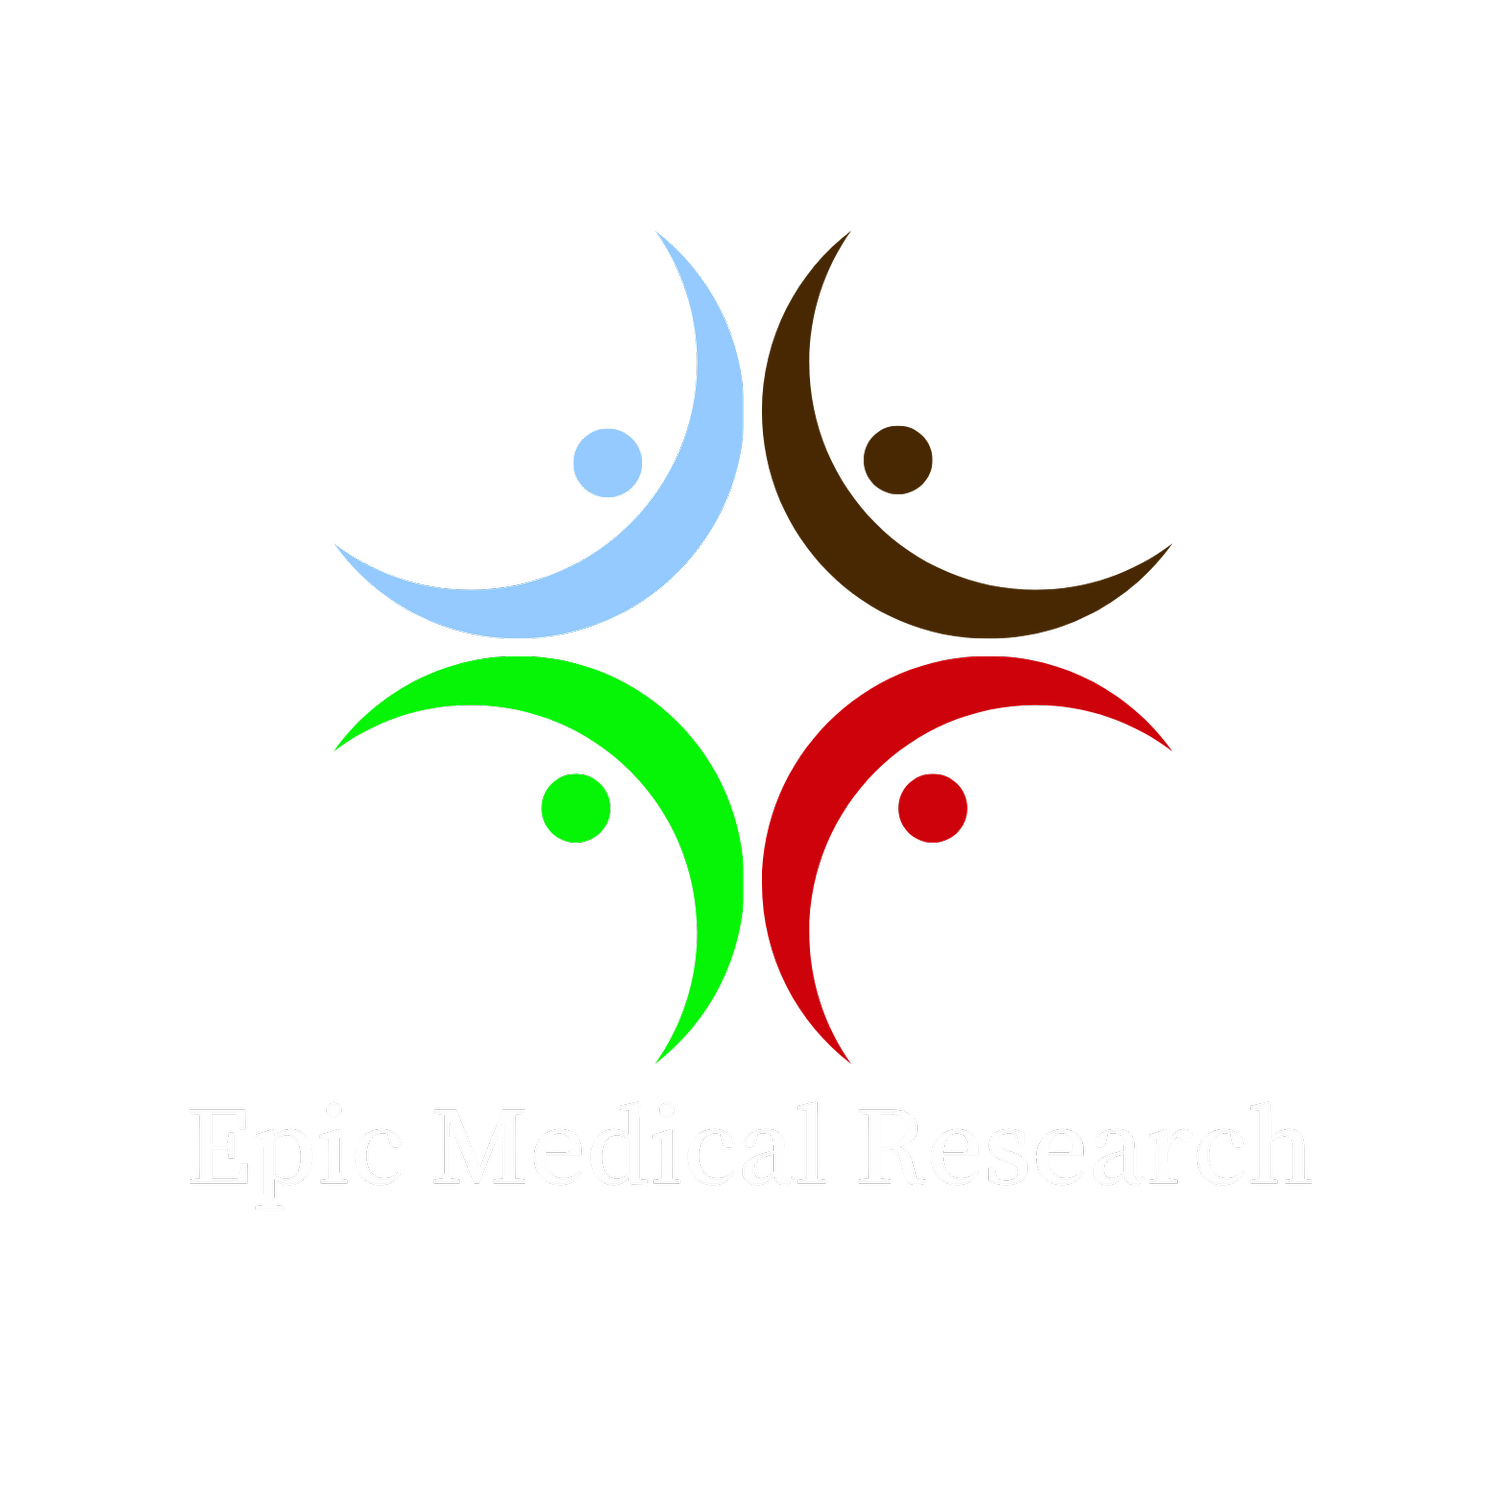 Epic Medical Research